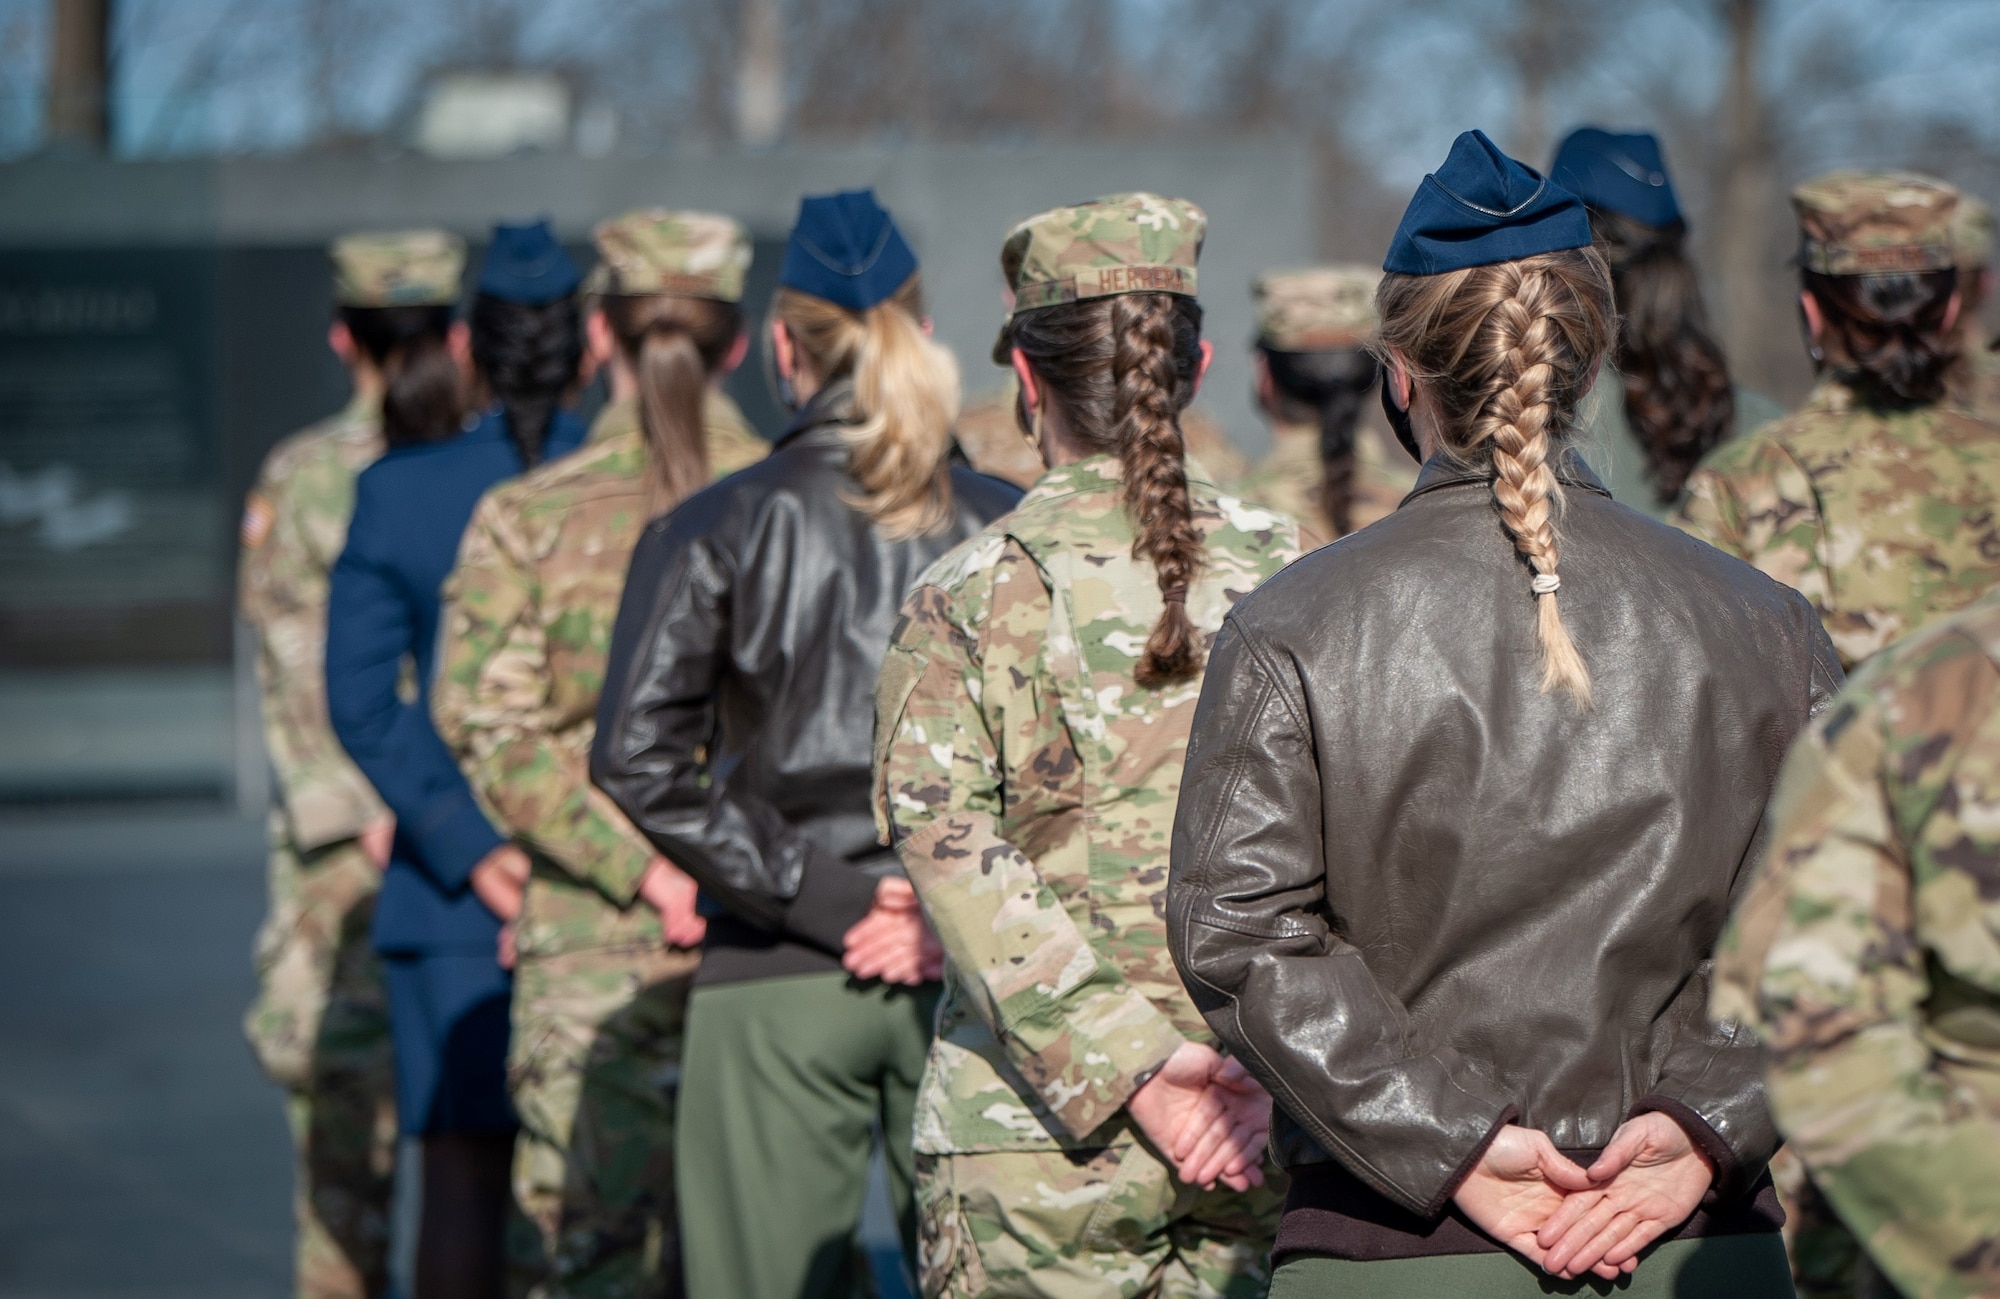 As an outcome of the 101st Air Force uniform board, Air Force women will be able to wear their hair in up to two braids or a single ponytail with bulk not exceeding the width of the head and length not extending below a horizontal line running between the top of each sleeve inseam at the under arm through the shoulder blades. In addition, women’s bangs may now touch their eyebrows, but not cover their eyes. These new changes will be effective upon publication of the new standards in Air Force Instruction 36-2903 Feb. 10. (U.S. Air Force photo by Chief Master Sgt. Jaimee Freeman)